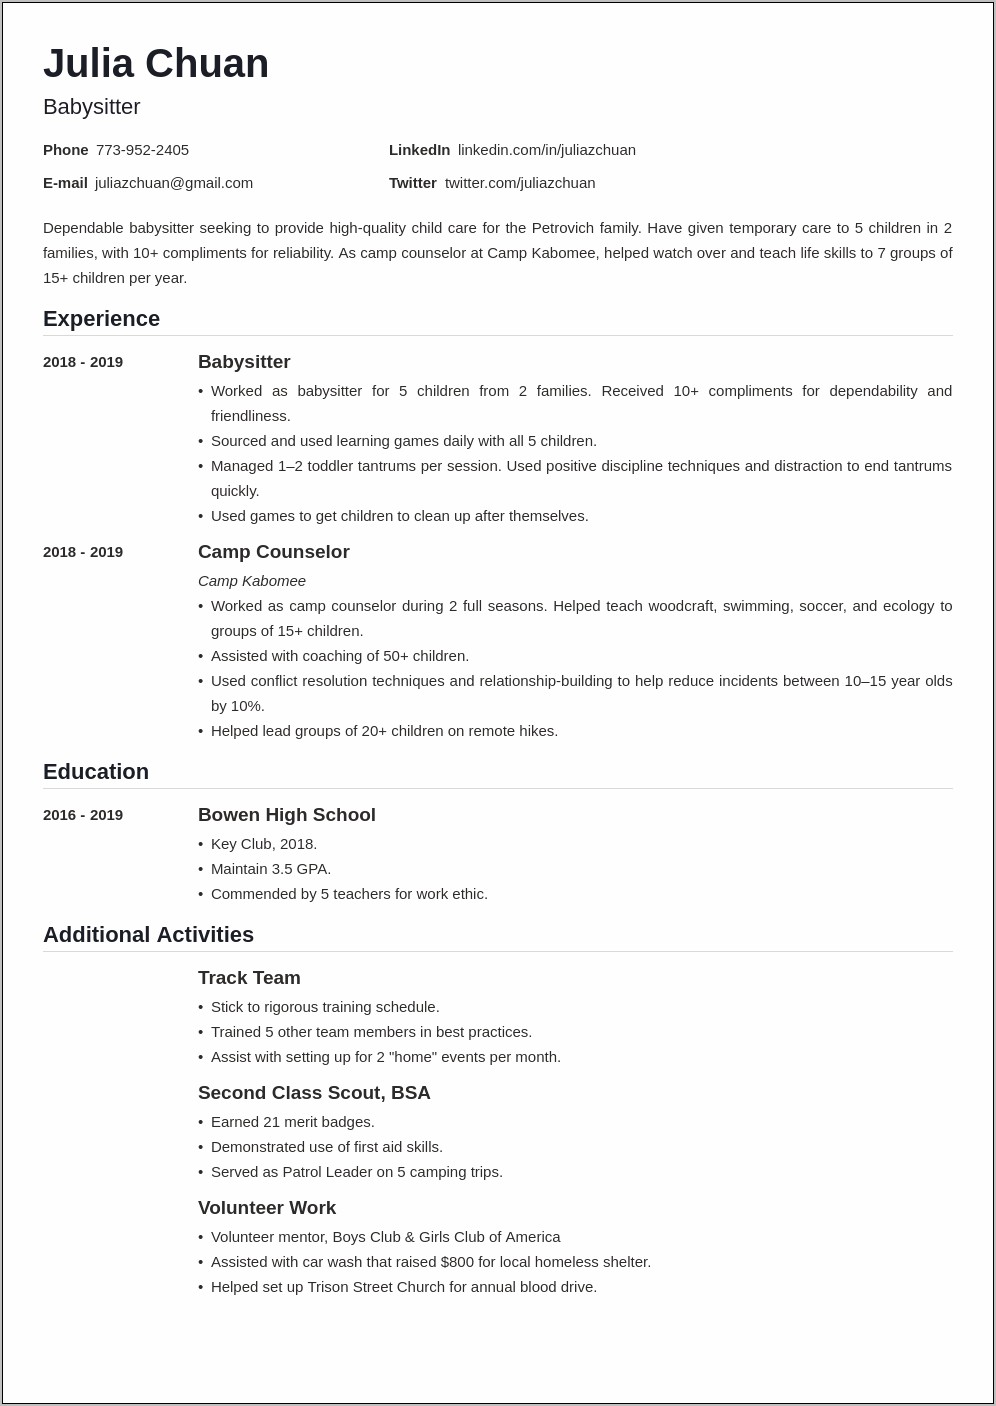 Adding Old Salary In Resume Good Or Bad